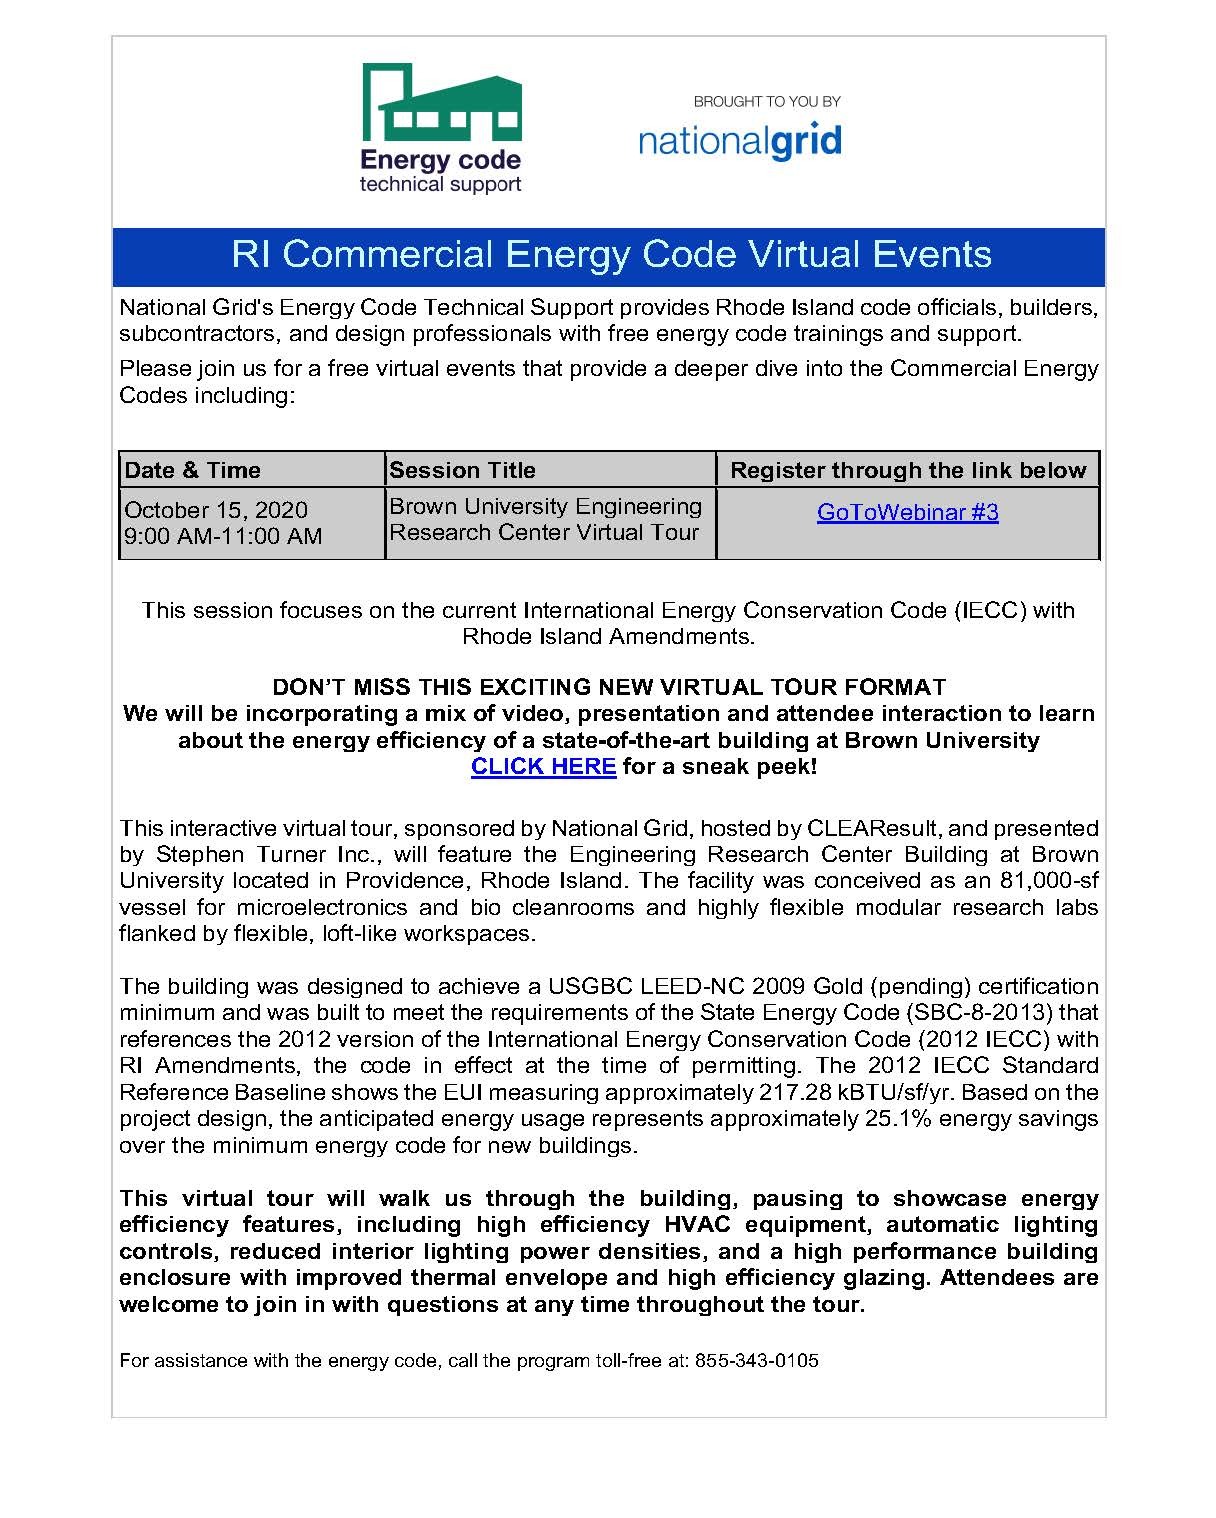 RI COMMERCIAL ENERGY CODE VIRTUAL EVENTS